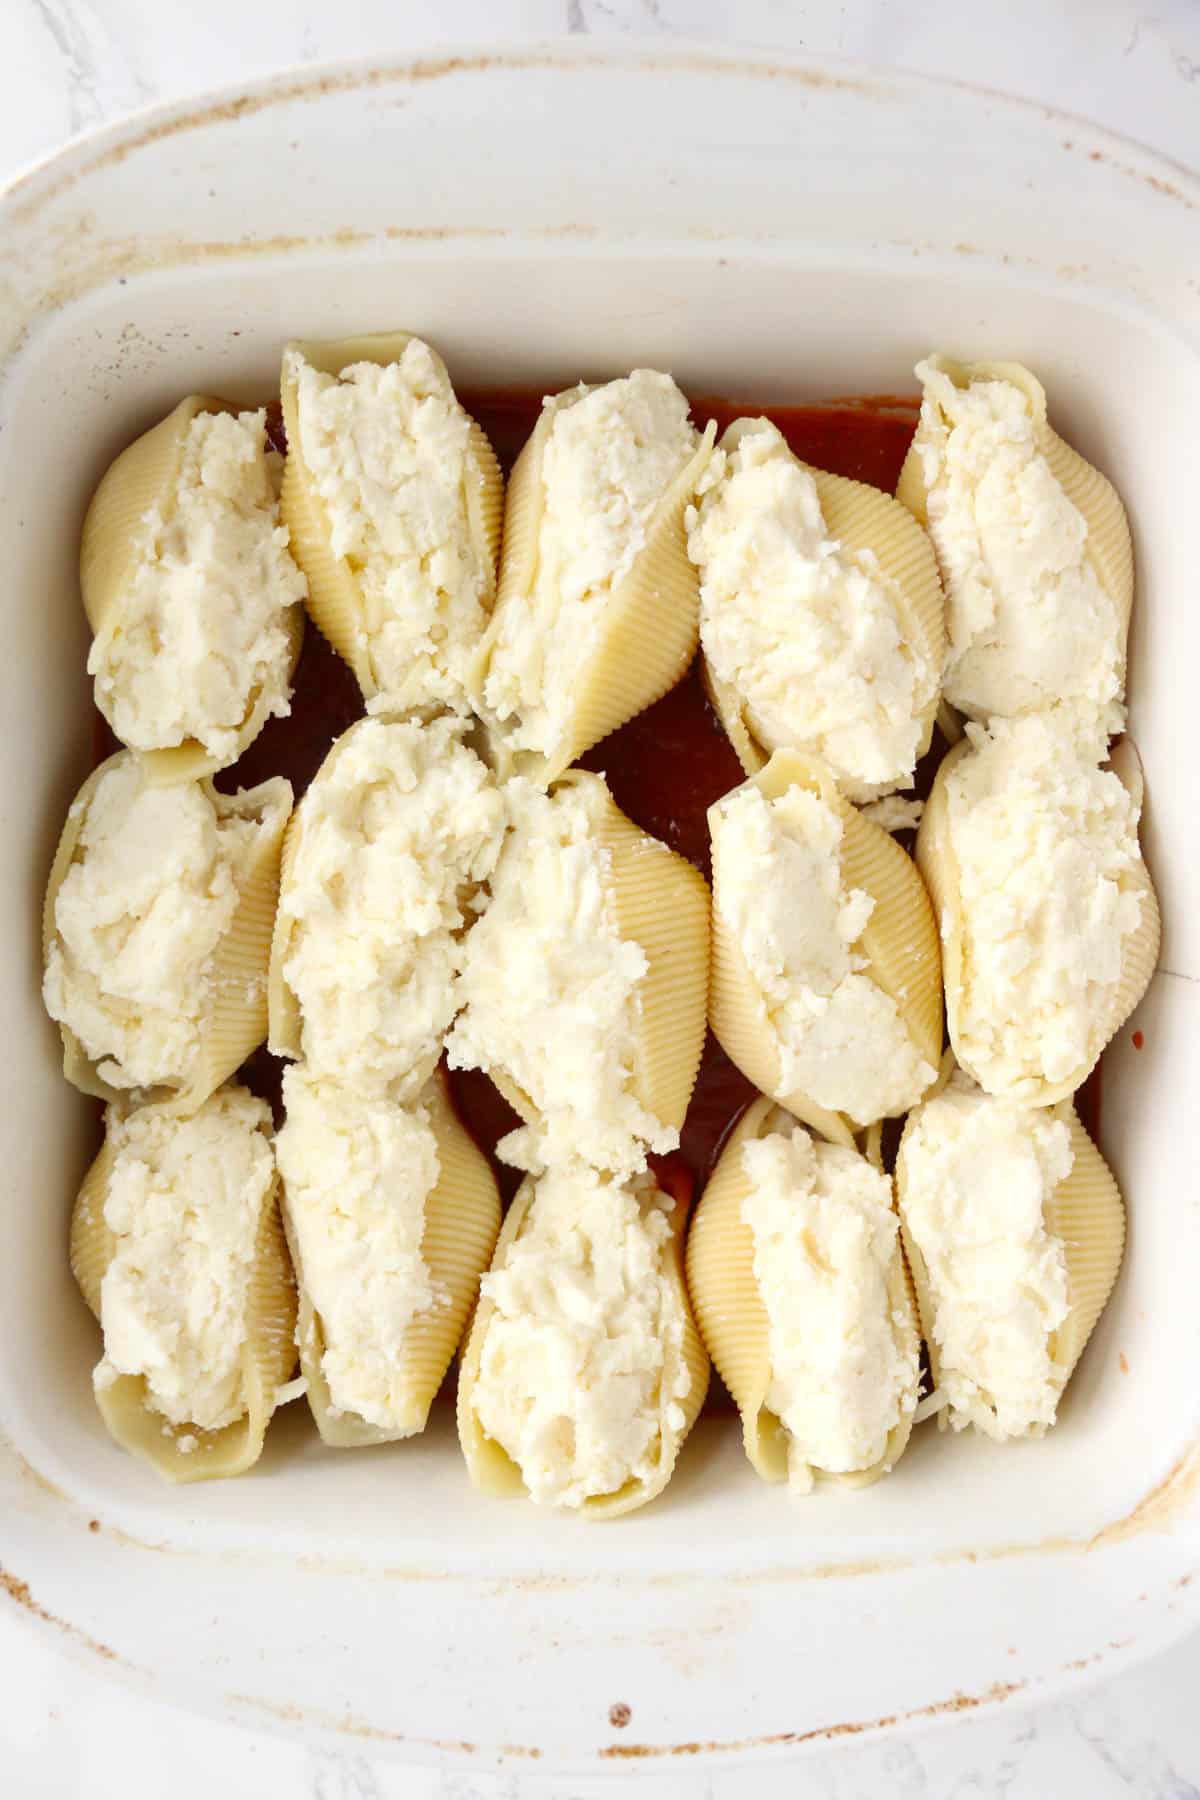 Jumbo pasta shells stuffed with cheese mixture in a white baking dish.